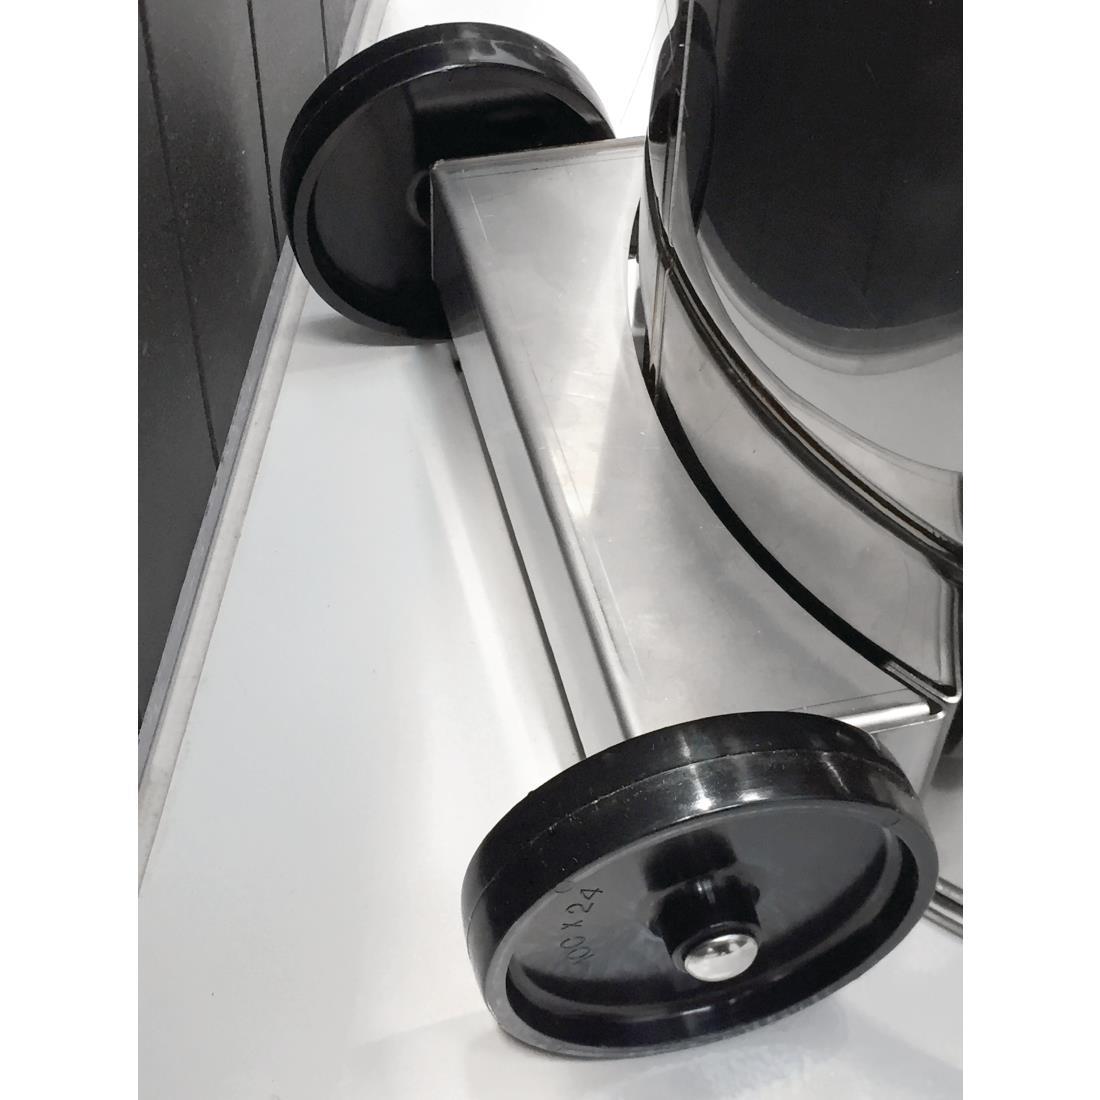 Burco Mobile Hand Wash Basin with Pedal - DF607  - 6